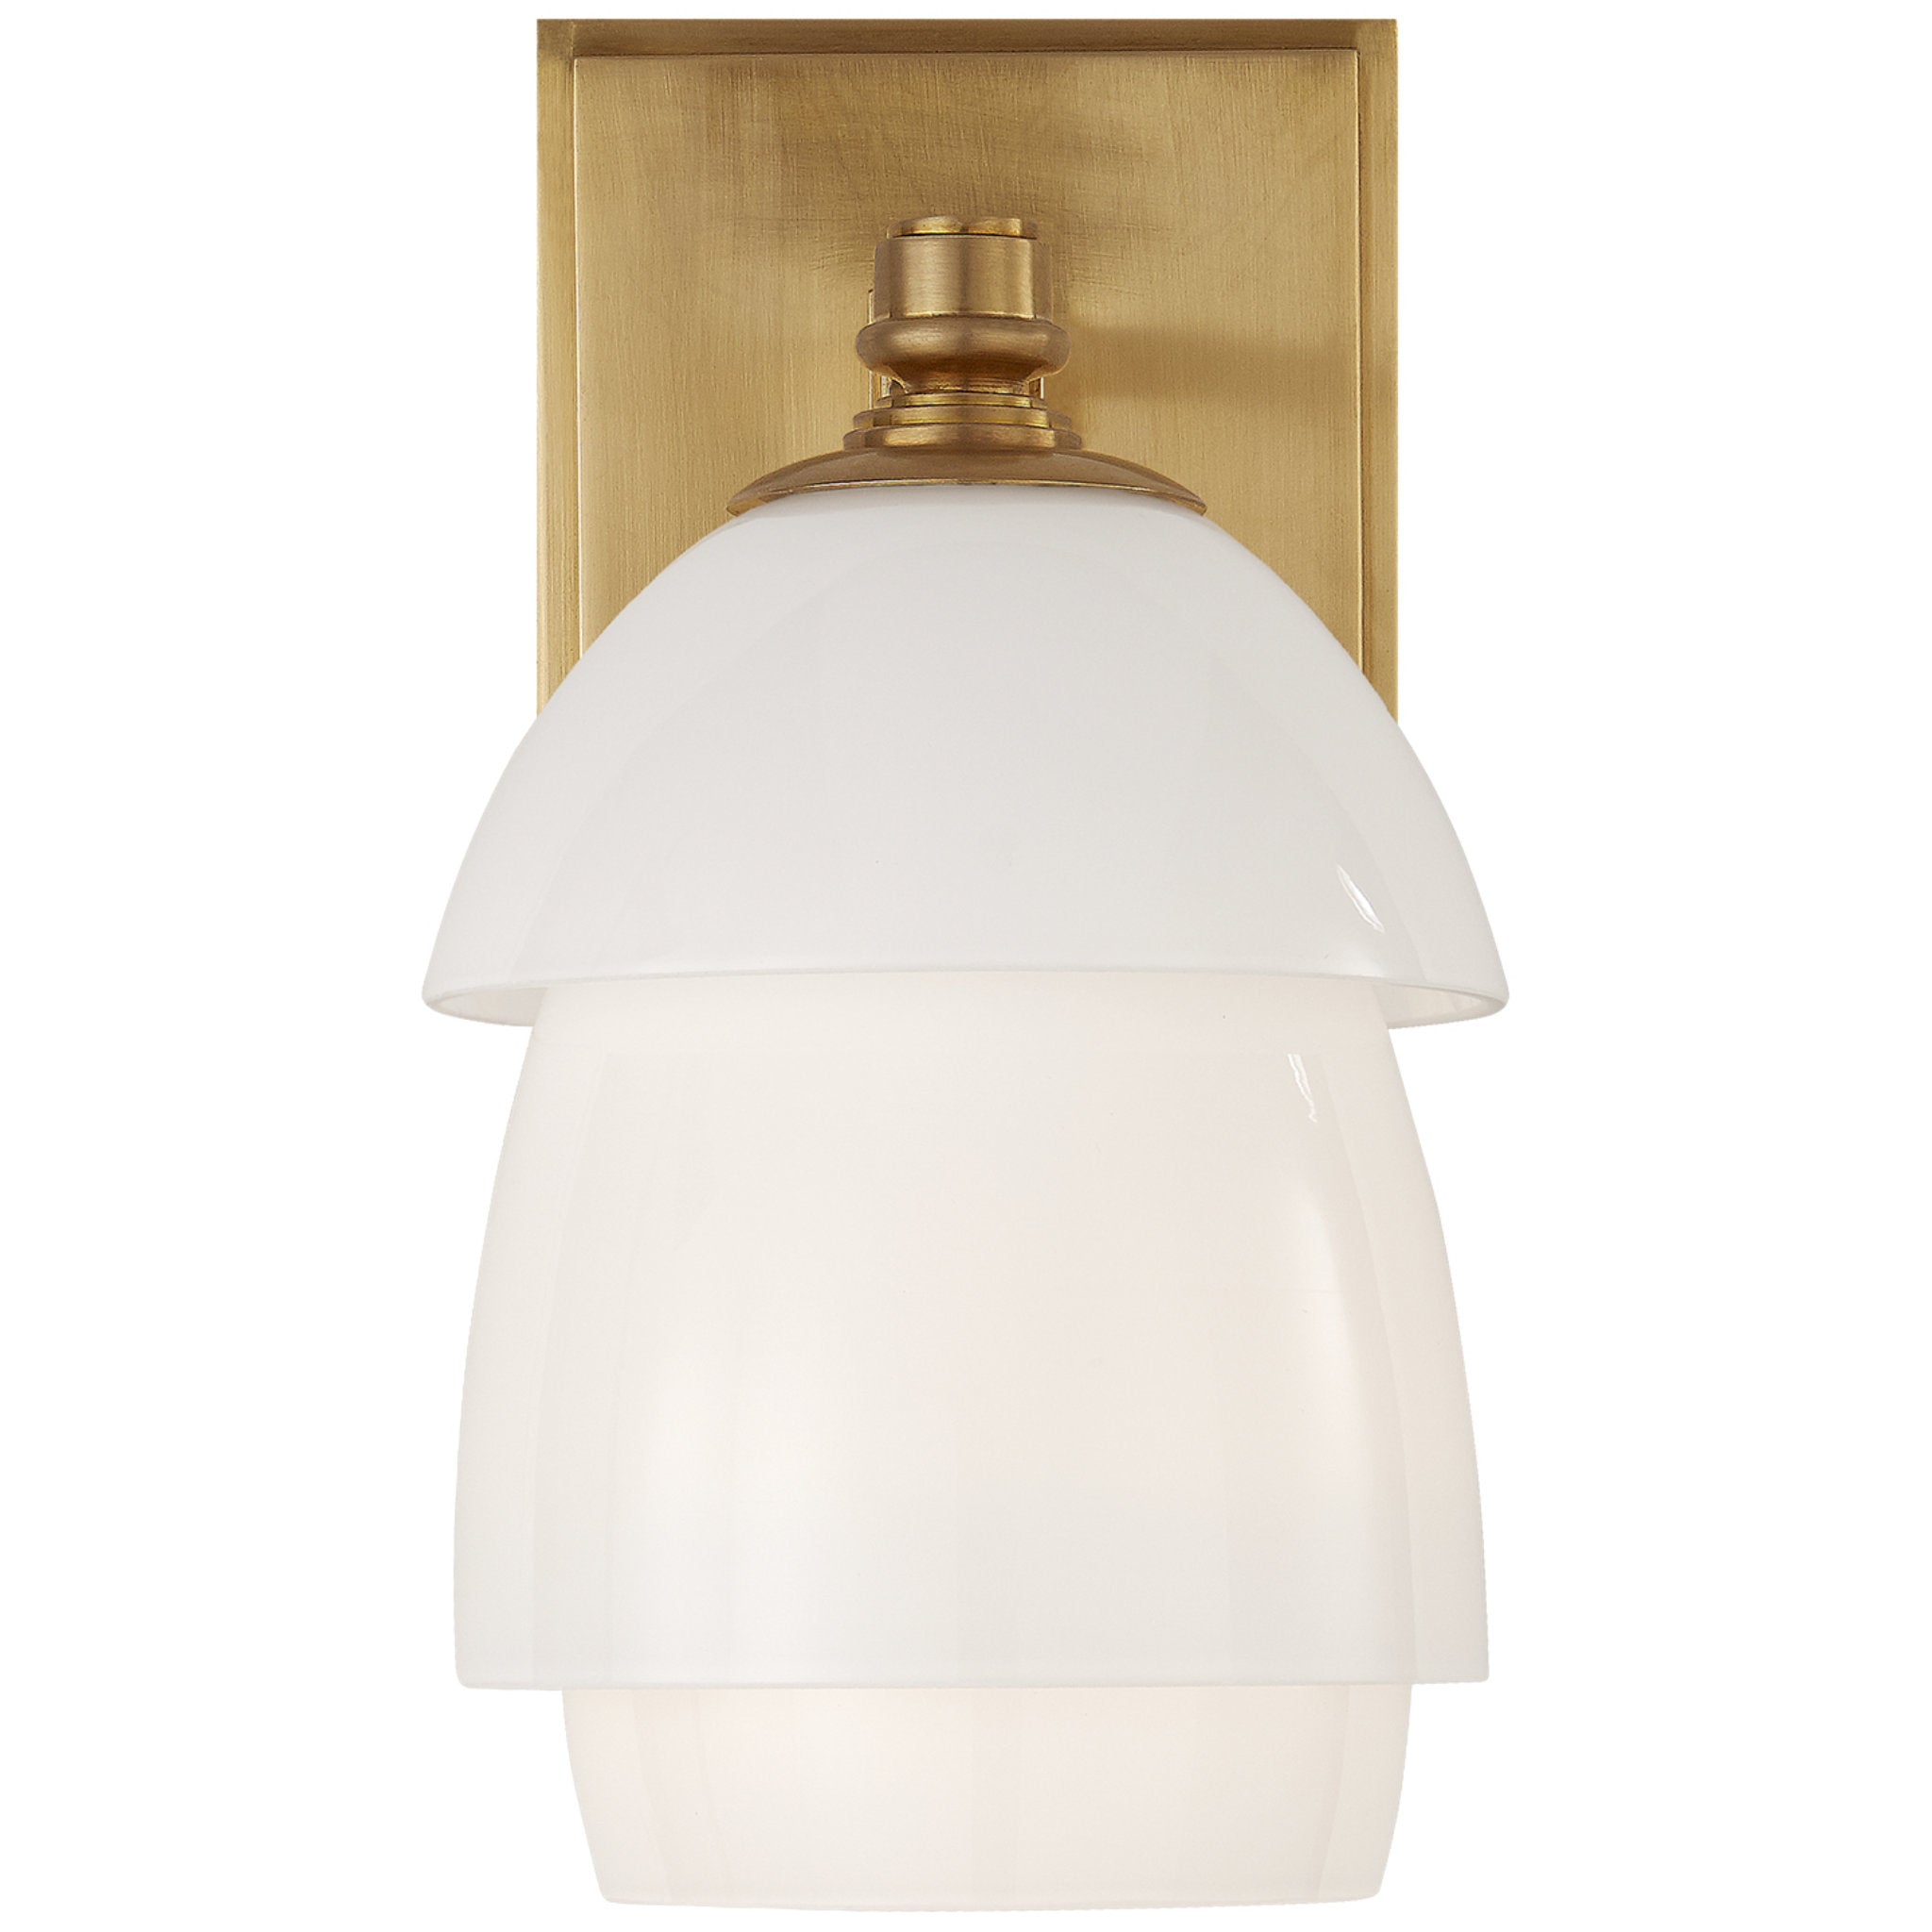 Thomas O'Brien Whitman Small Sconce in Hand-Rubbed Antique Brass with White Glass Shade